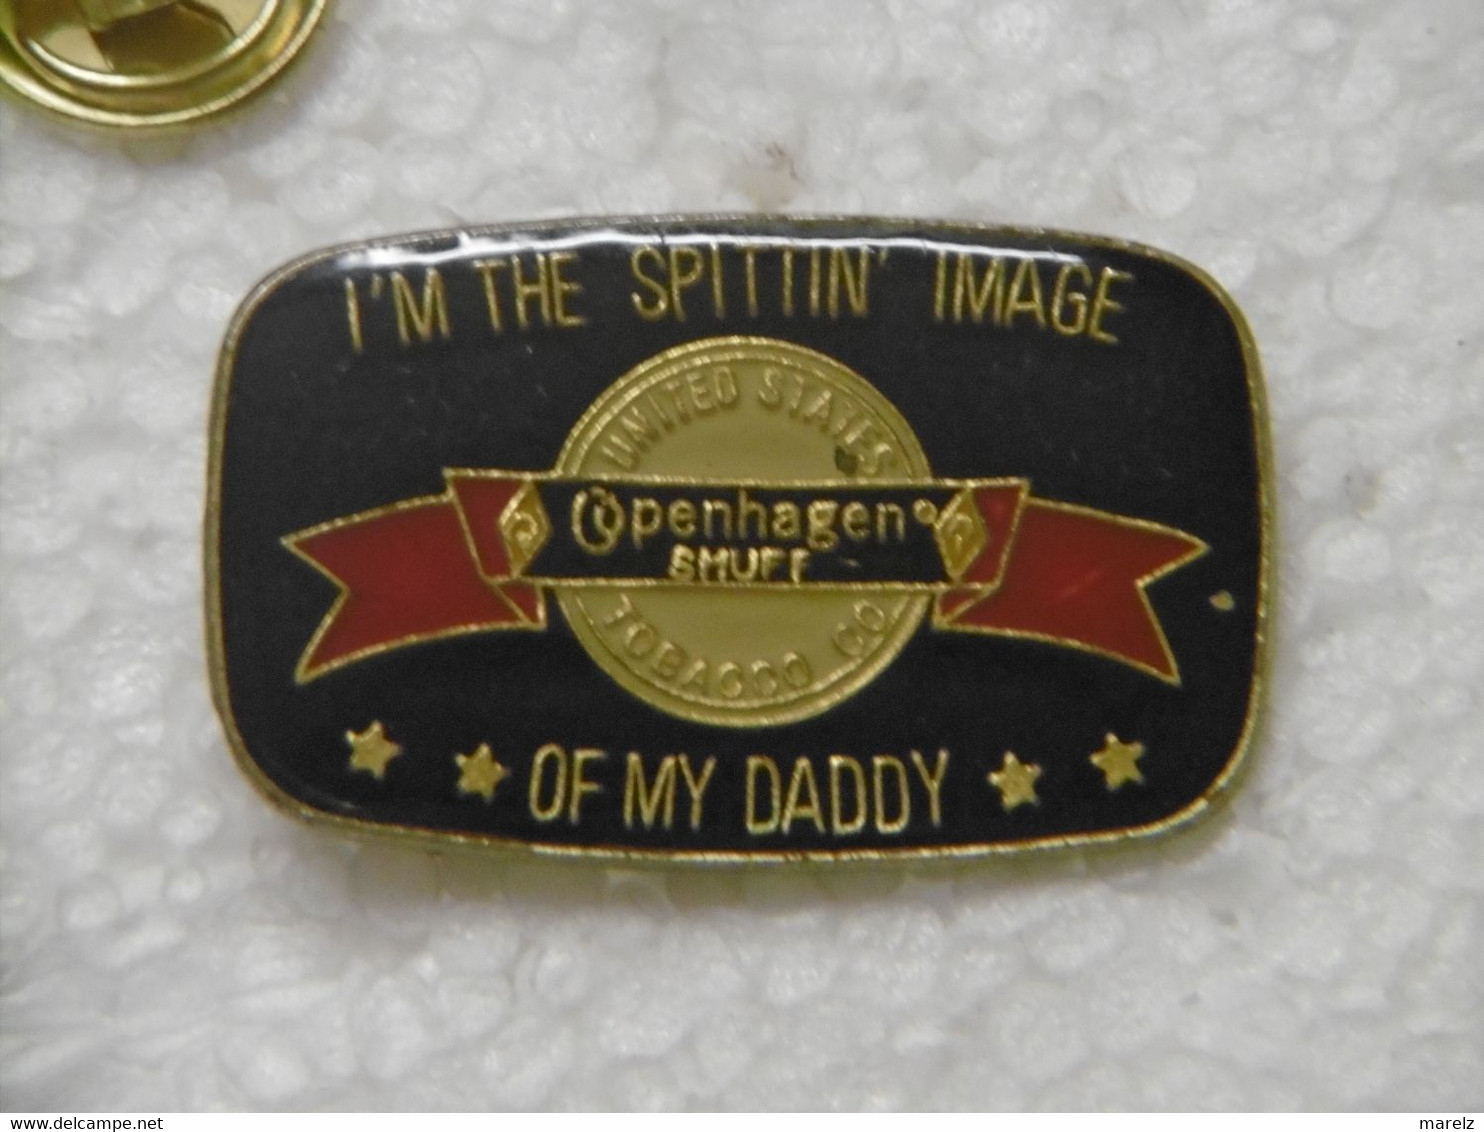 Pin's - Tabac COPENHAGEN SNUFF TABACCO Of My DADDY - Advertising Items